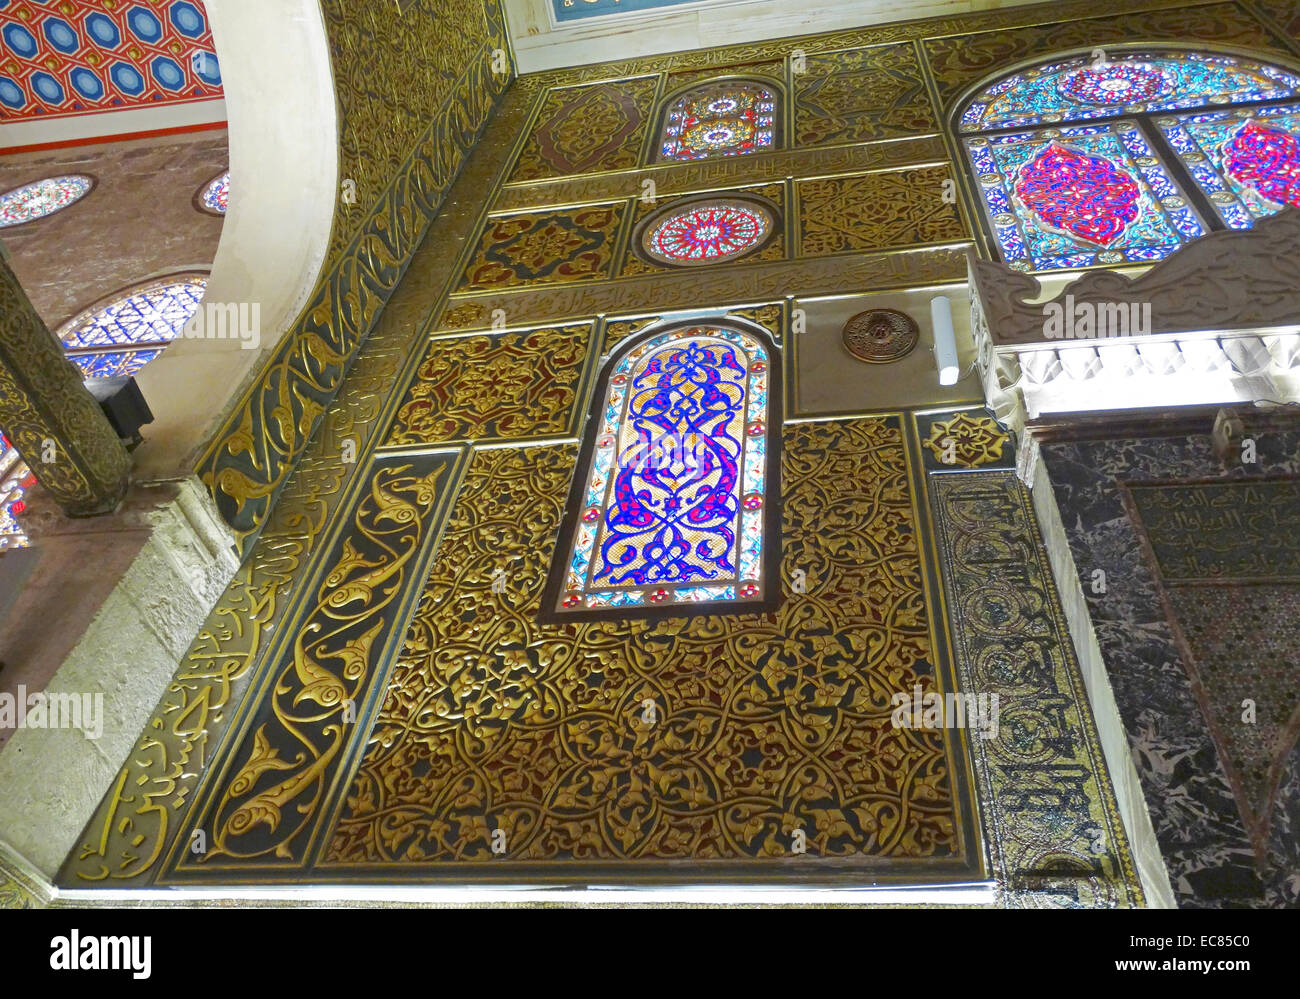 Decorated panels and stained glass in the Al-Aqsa Mosque. The third holiest site in Islam and is located in the Old City of Jerusalem. Stock Photo